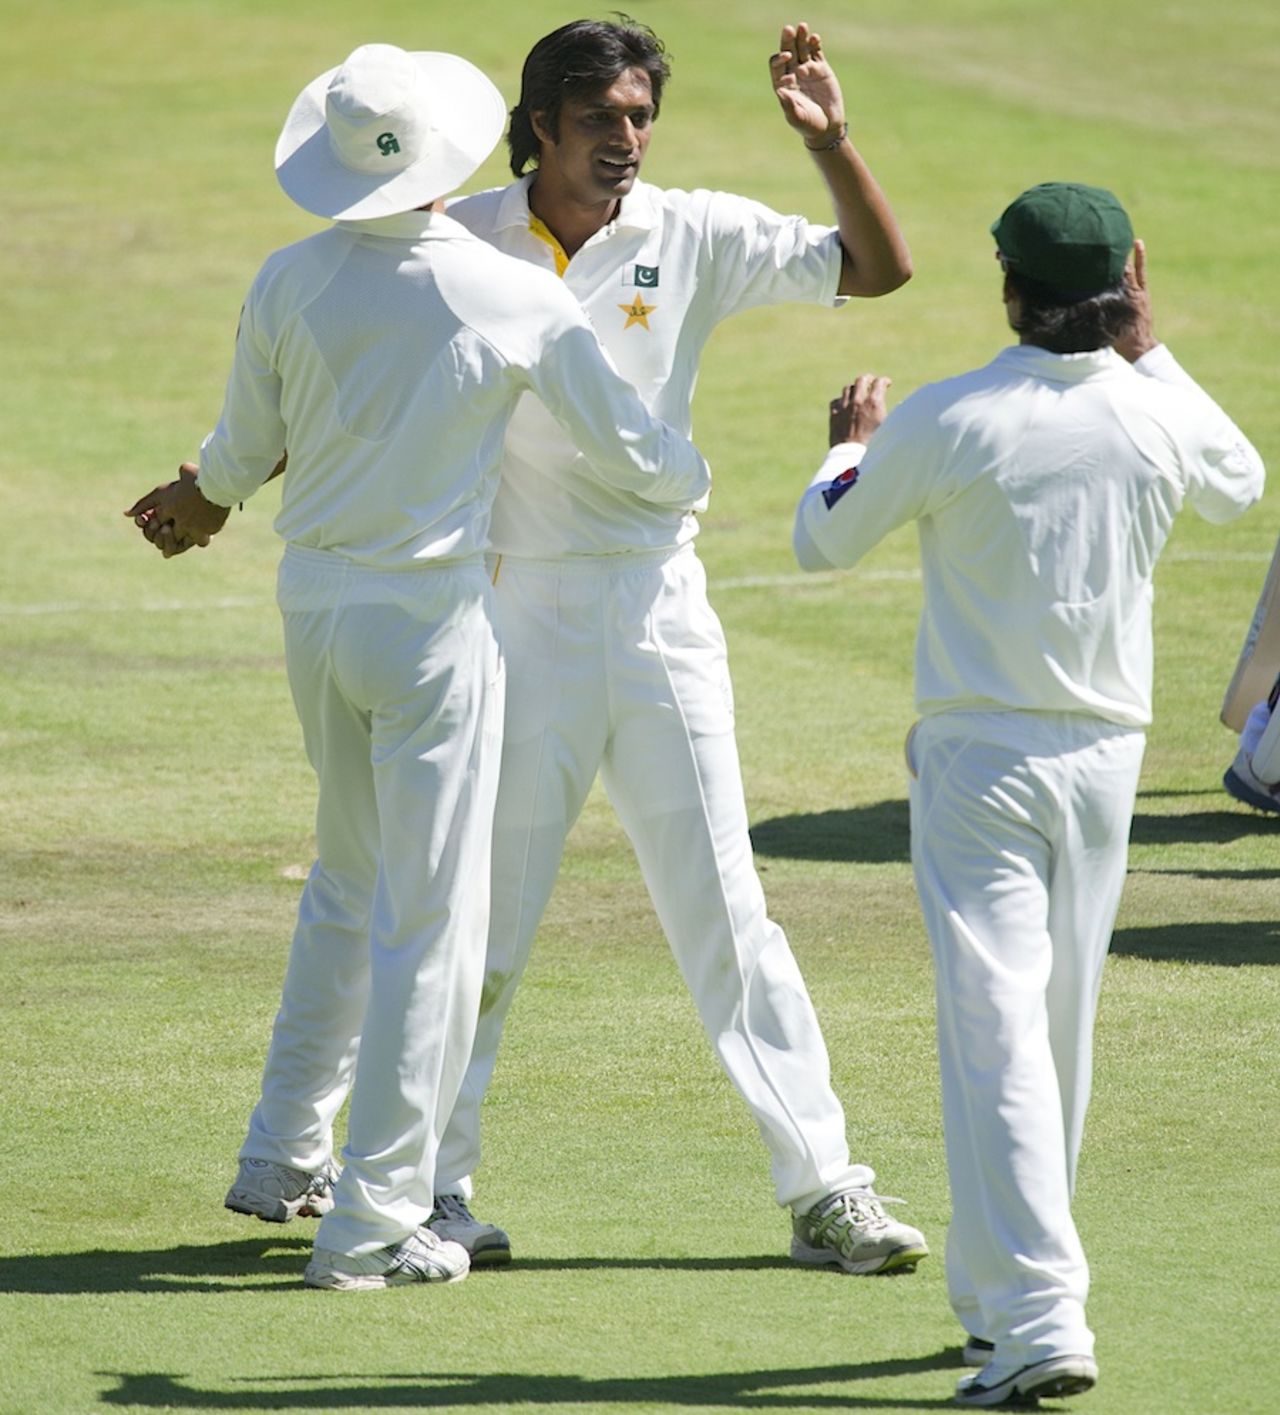 Rahat Ali is congratulated after picking up Hashim Amla's wicket, South Africa v Pakistan, 3rd Test, Centurion, 1st day, February 22, 2013